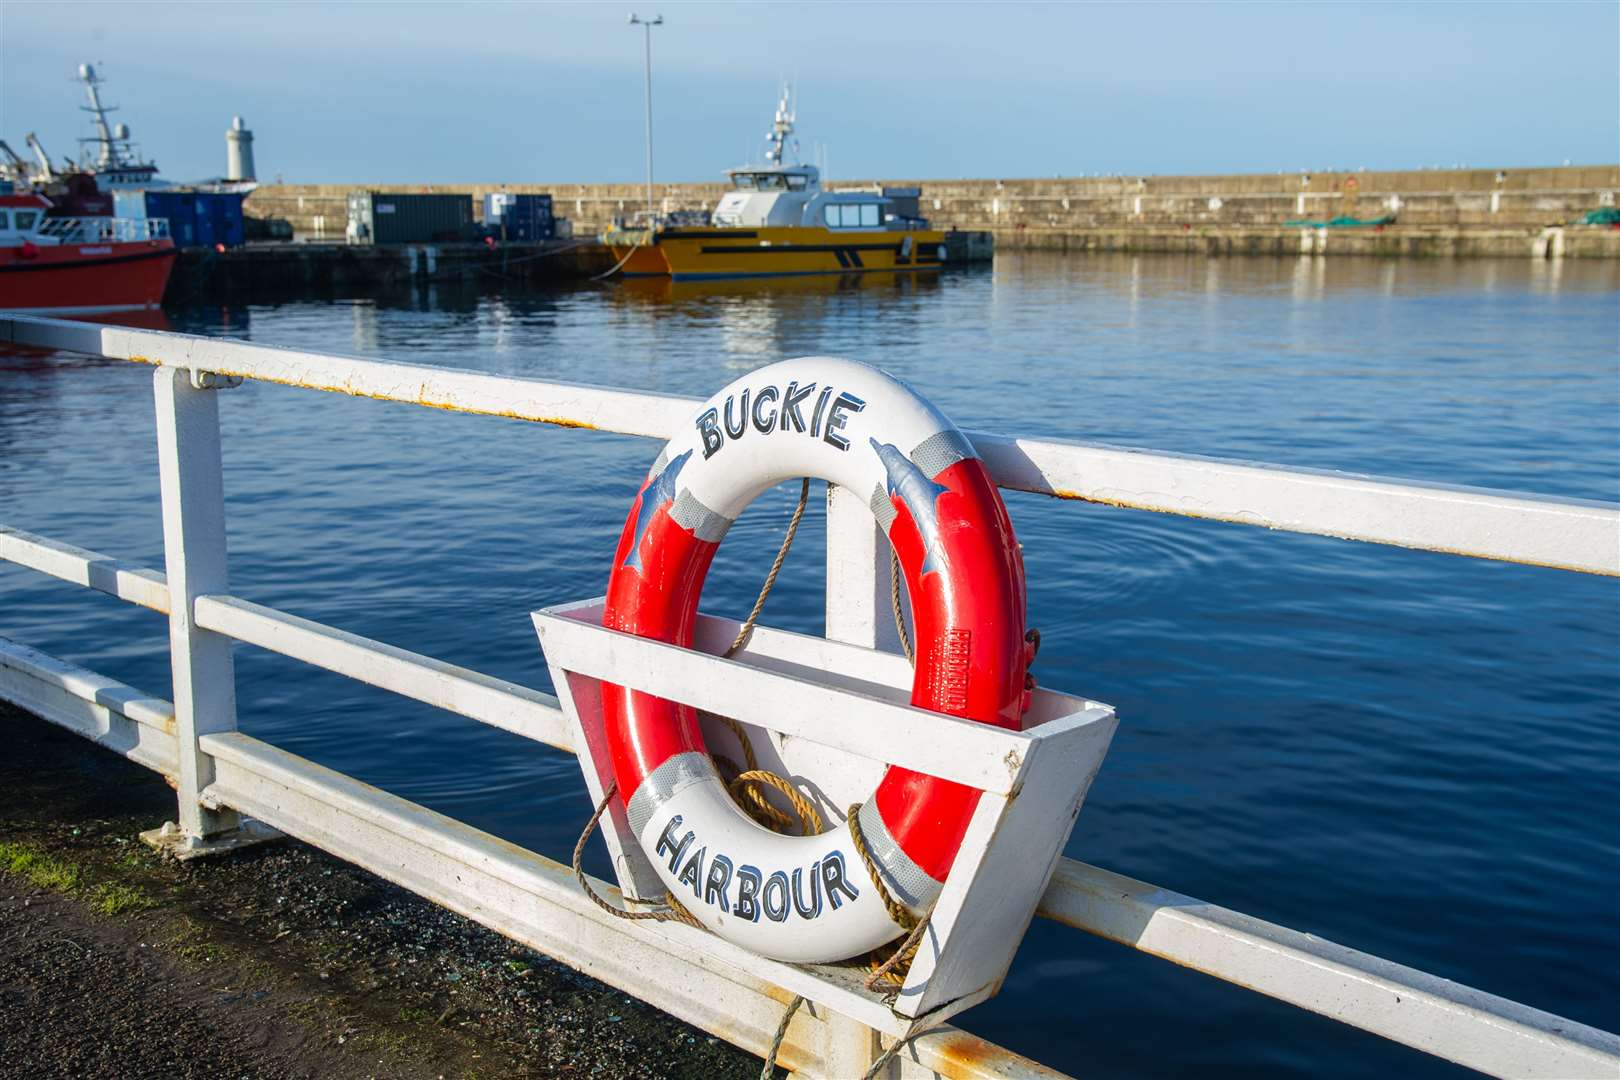 It was another quiet week of fish landings at Buckie. Picture: Daniel Forsyth